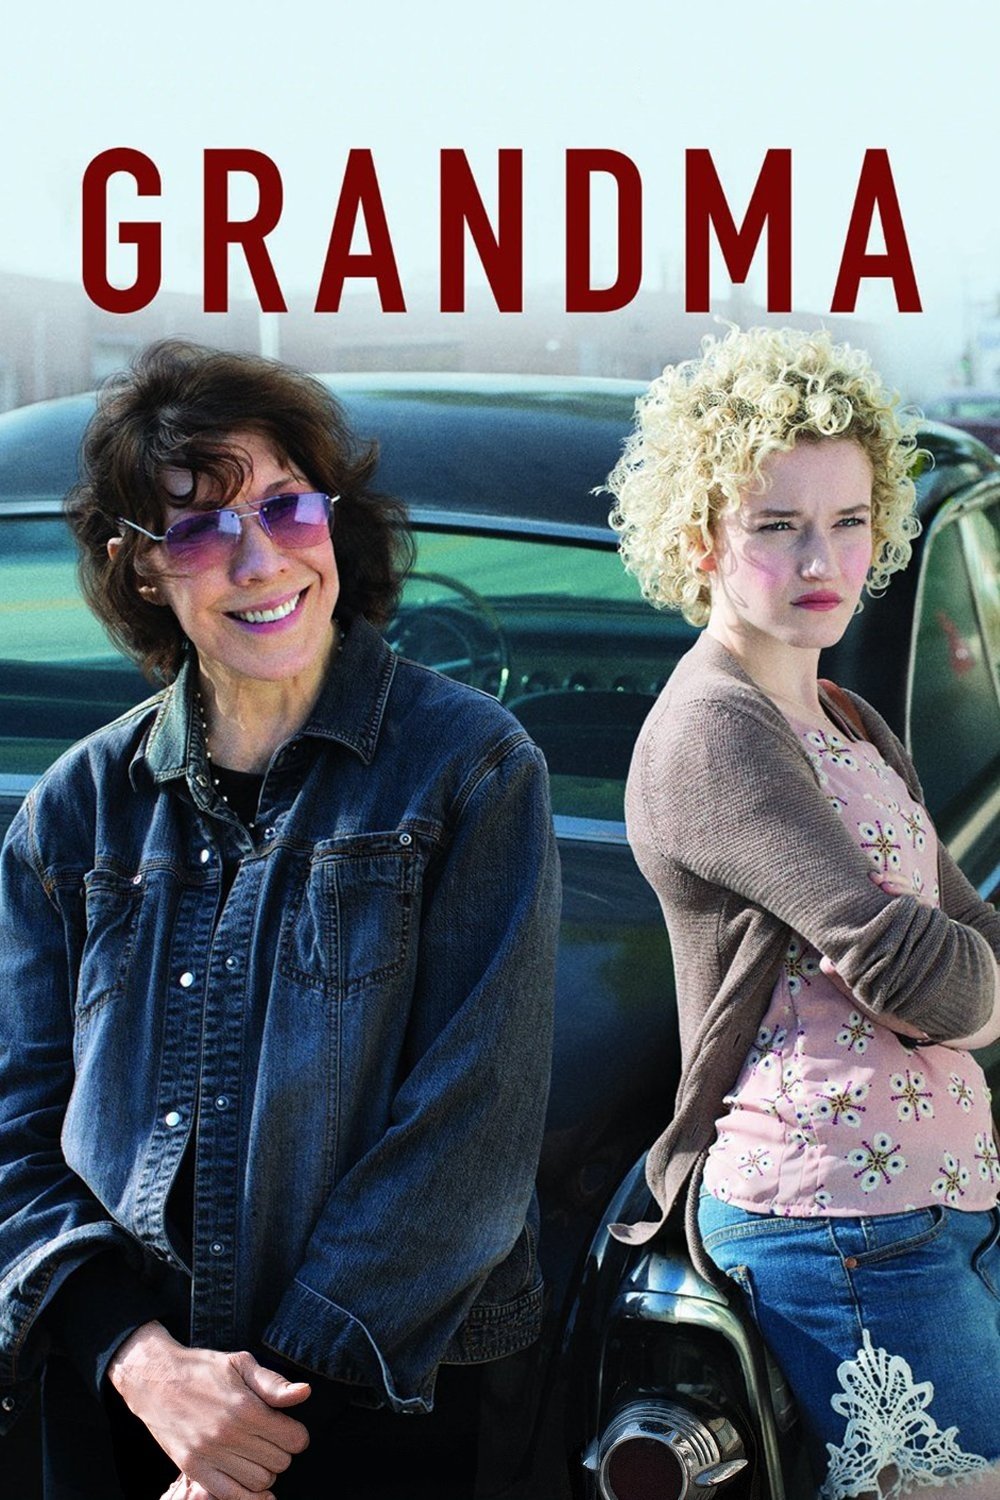 Poster for the movie "Grandma"